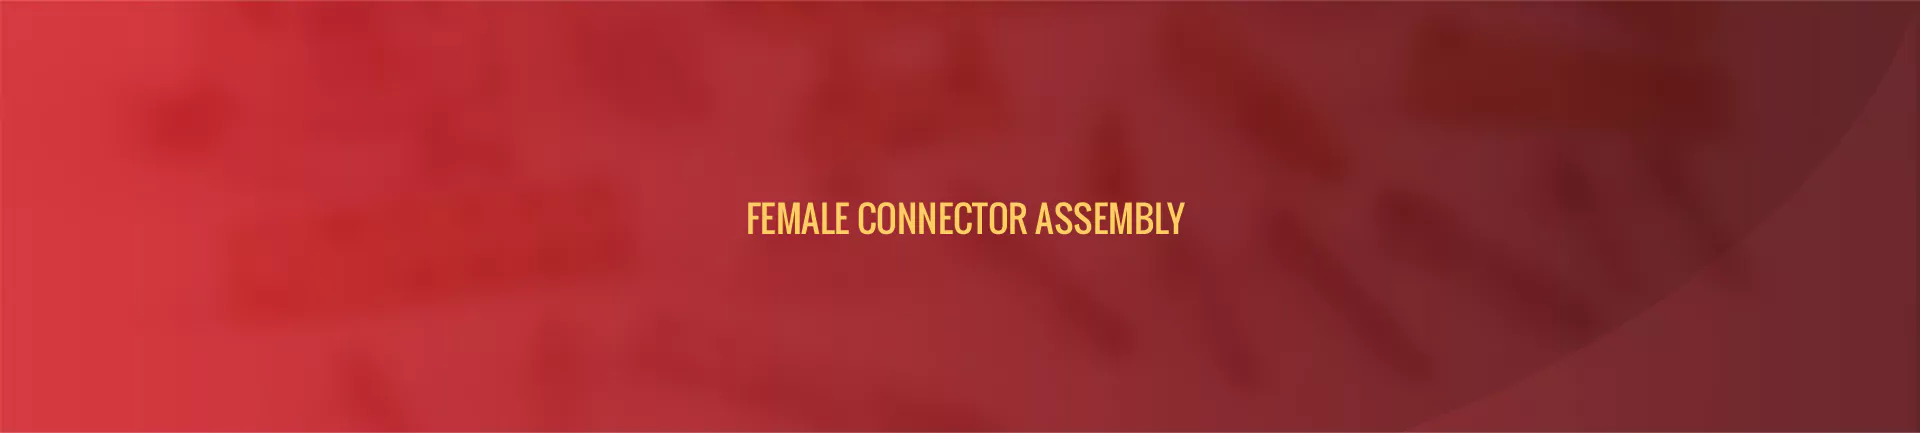 female_connector_assembly-banner